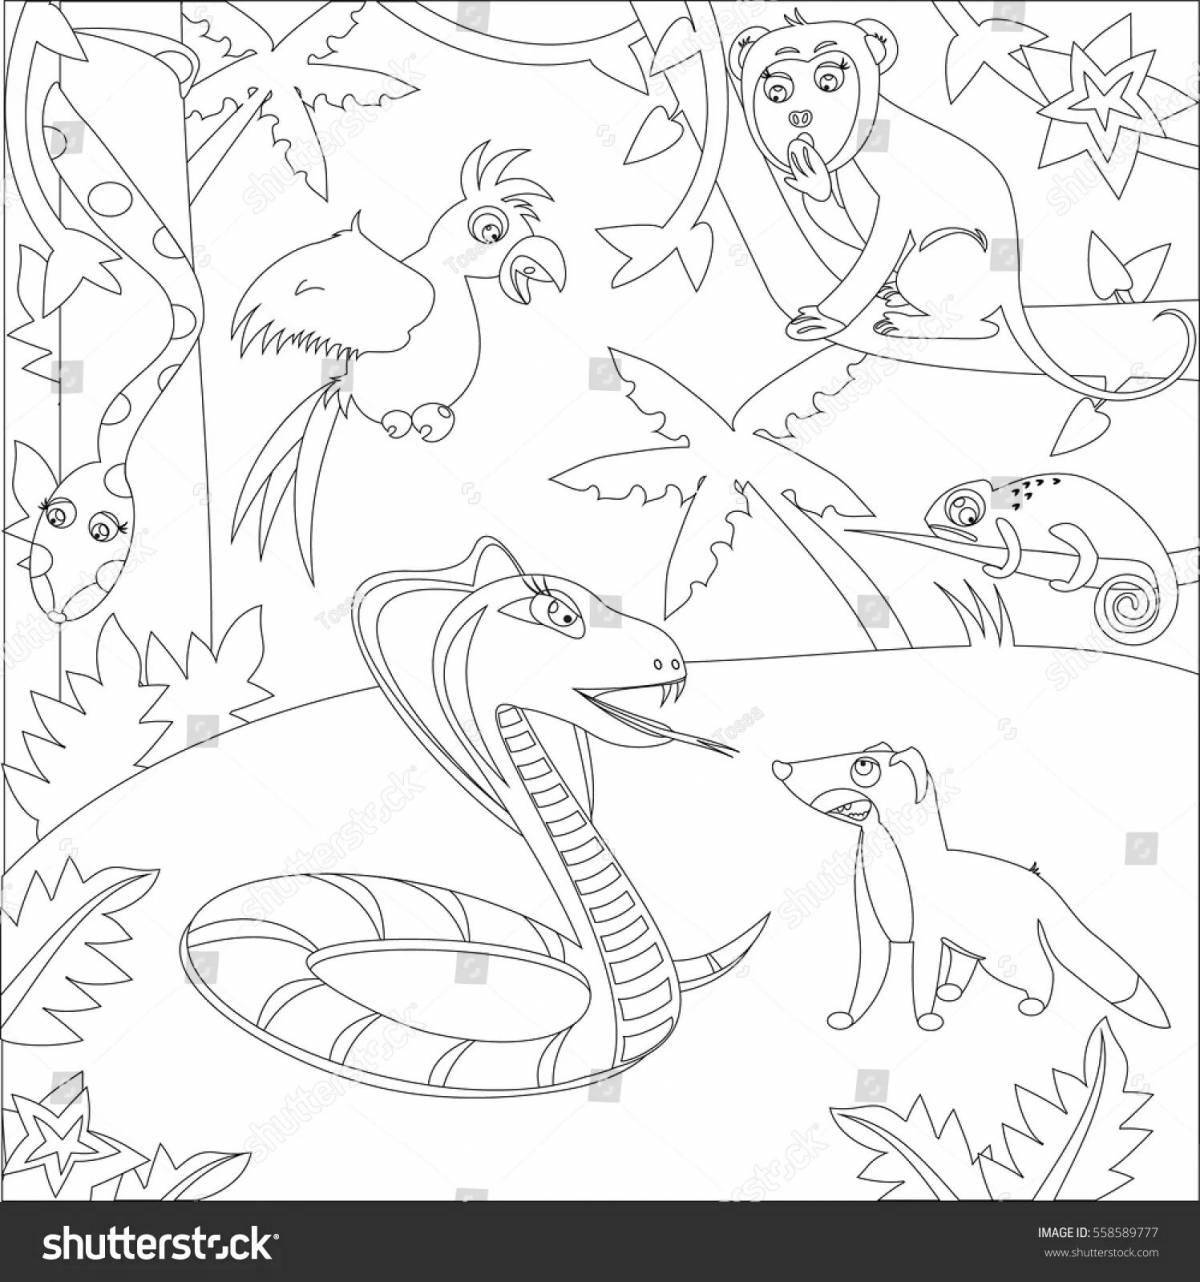 Mongoose live coloring page